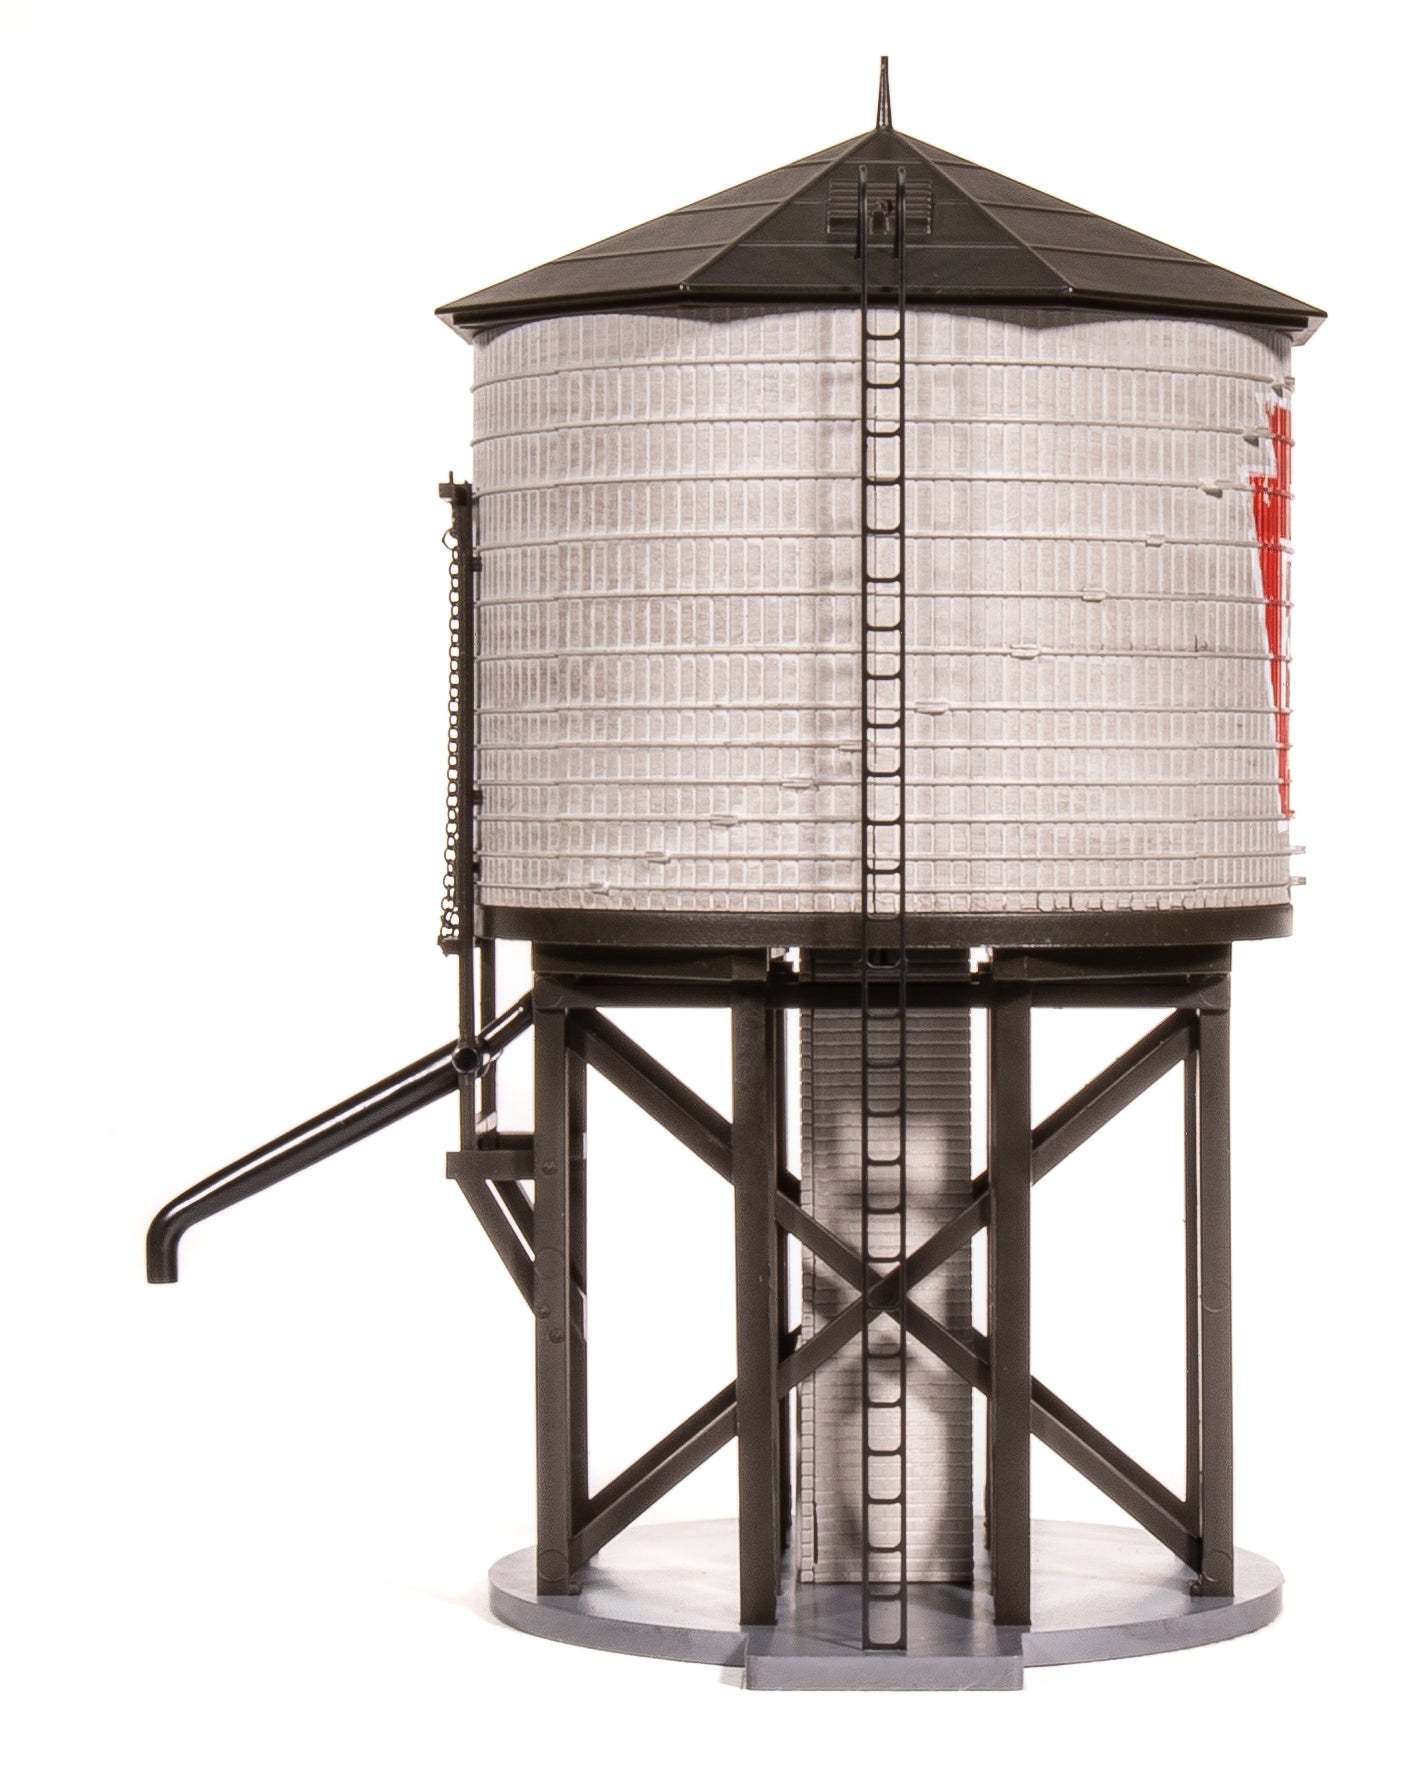 7922 Operating Water Tower w/ Sound, PRR, Weathered, HO Default Title